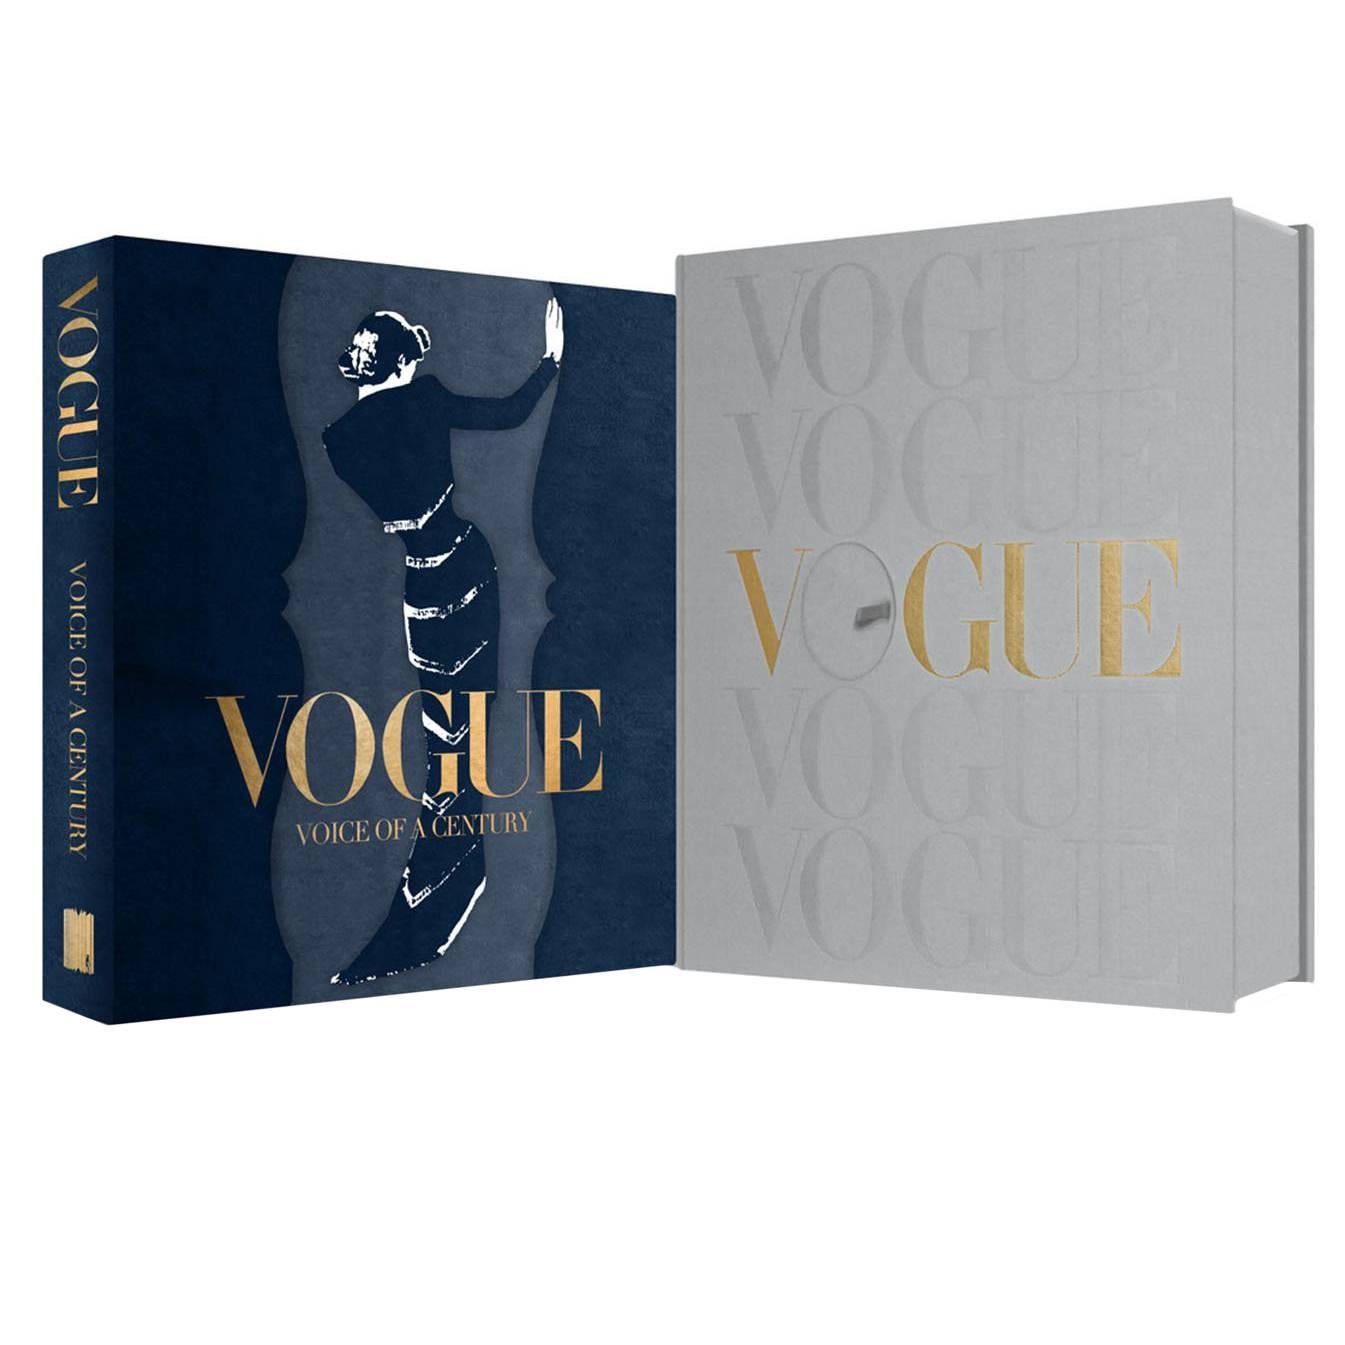 Vogue, Voice of a Century, the Official Signed Limited Edition Book For Sale